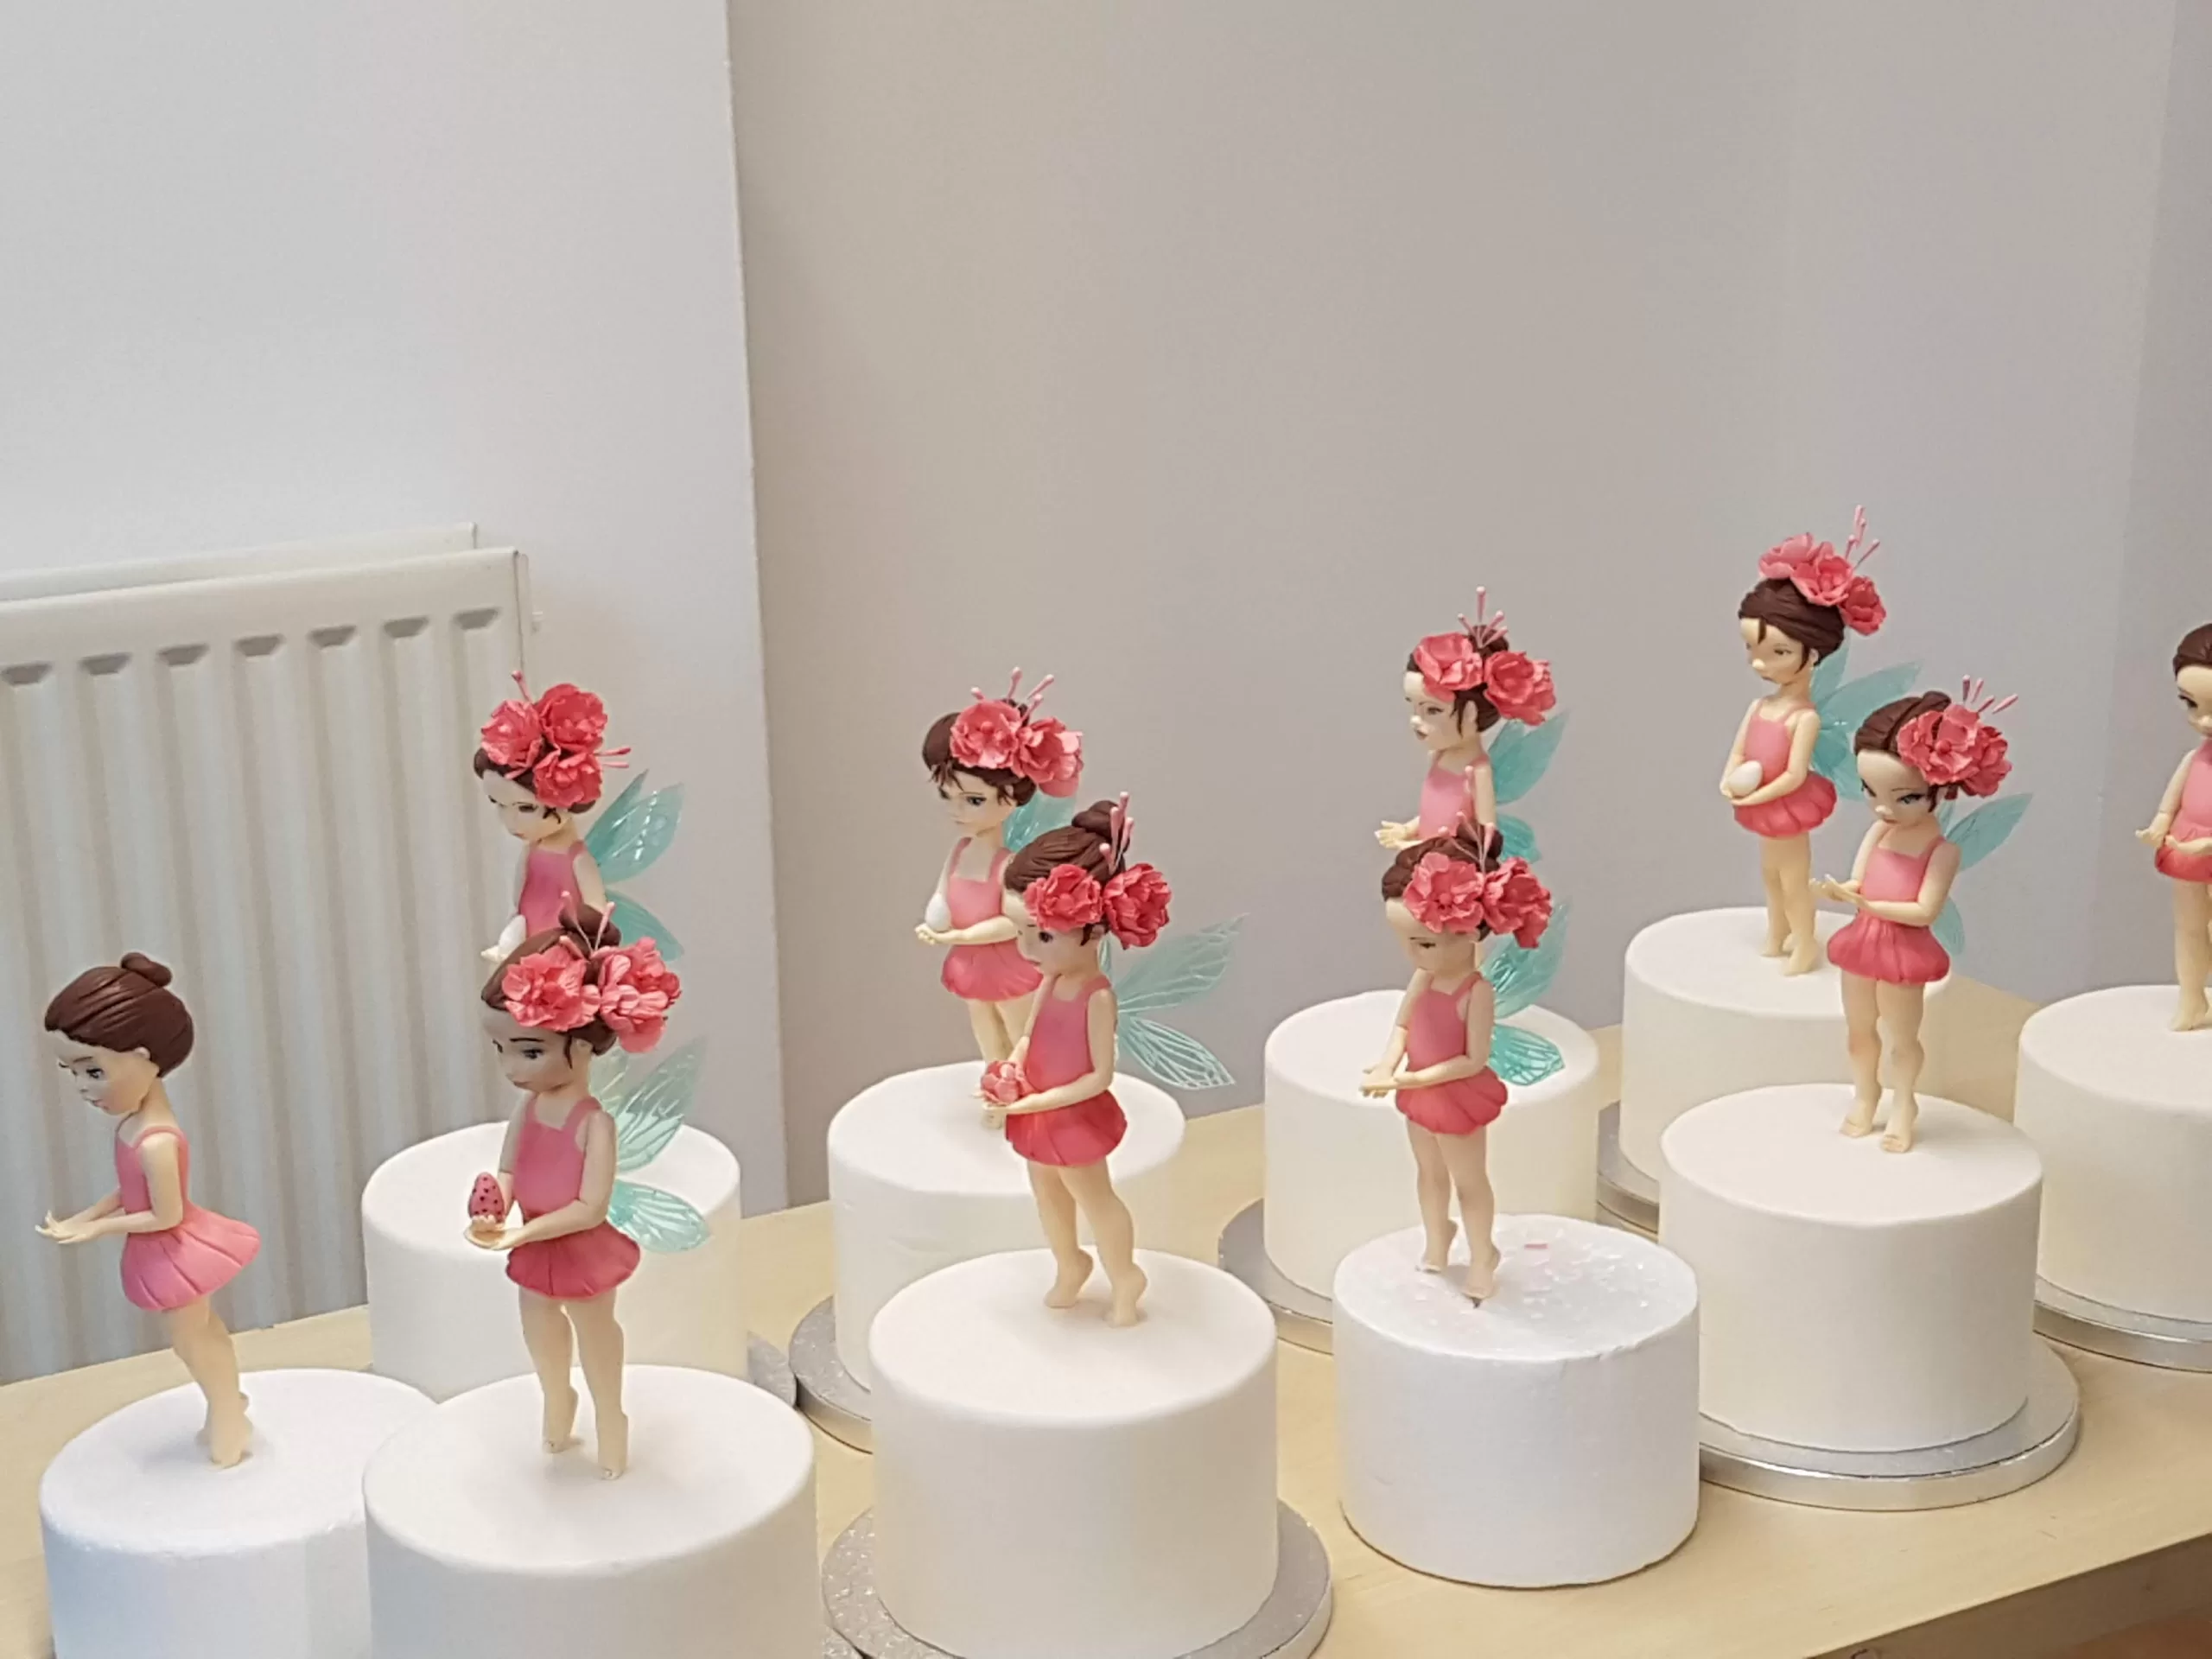 The History of the Carnation Flower - The London Cake Academy